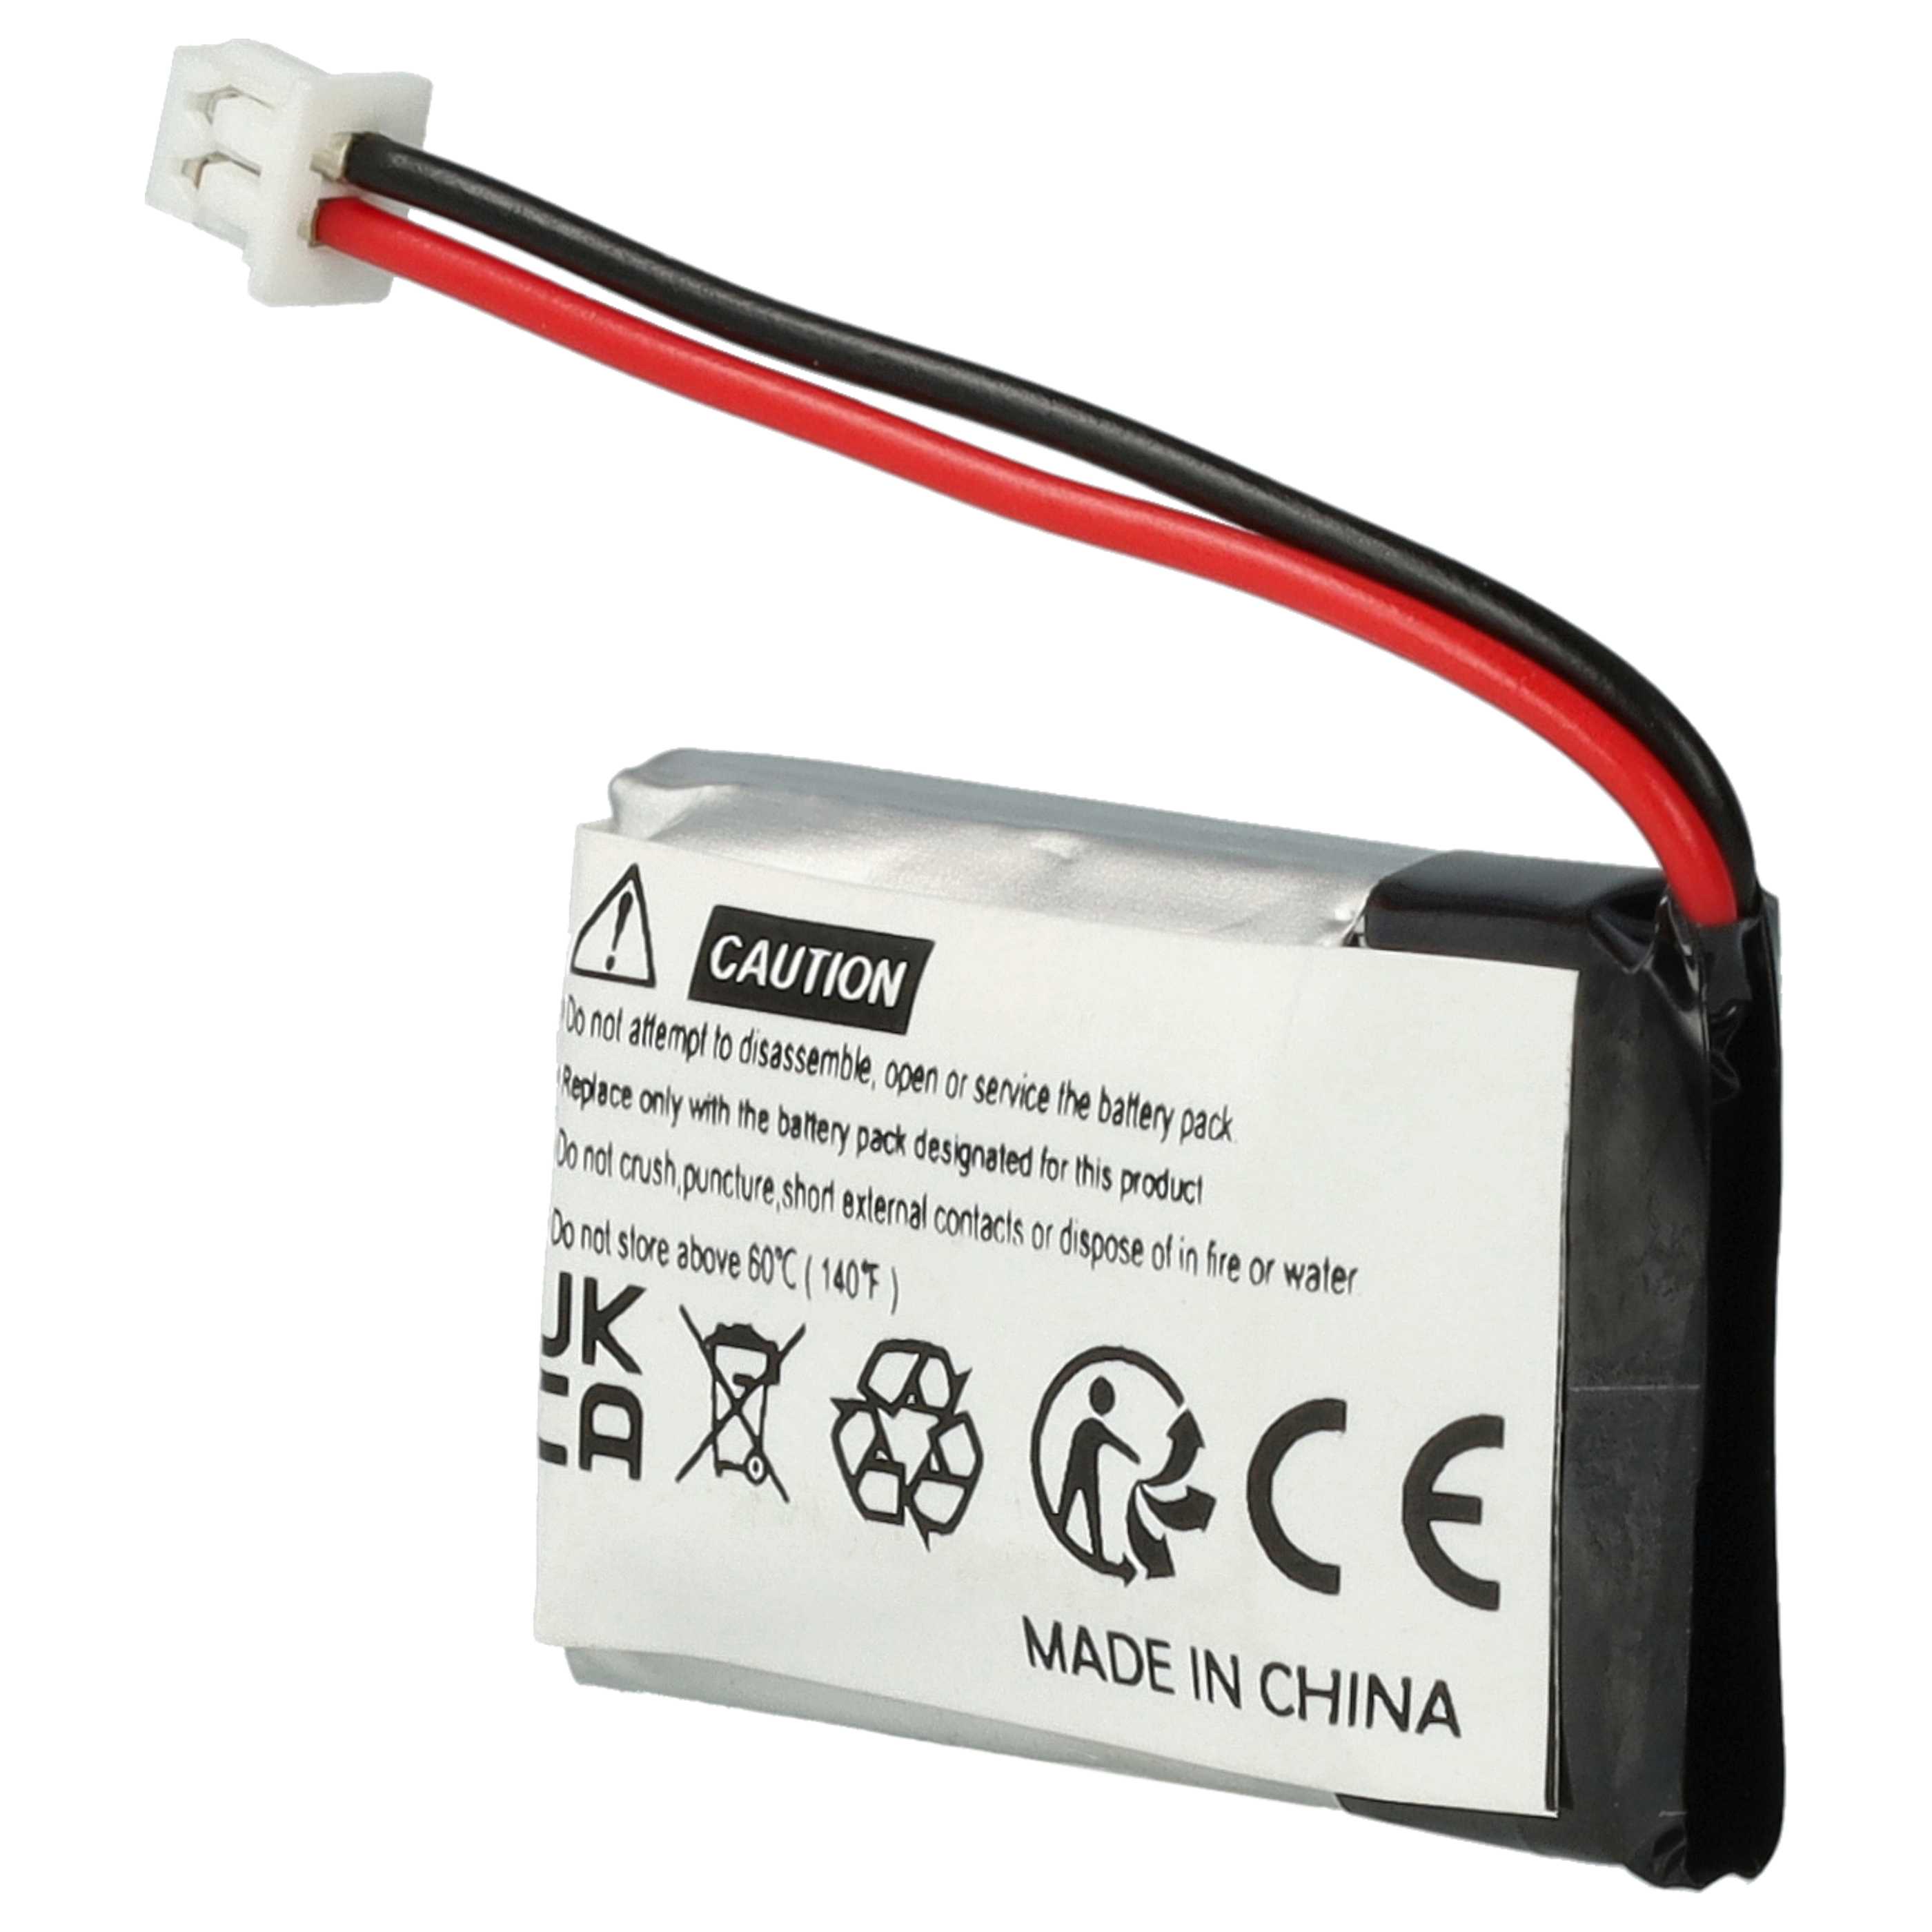 Model Making Device Battery Replacement for Carrera 20089823 - 150mAh 3.7V Li-polymer